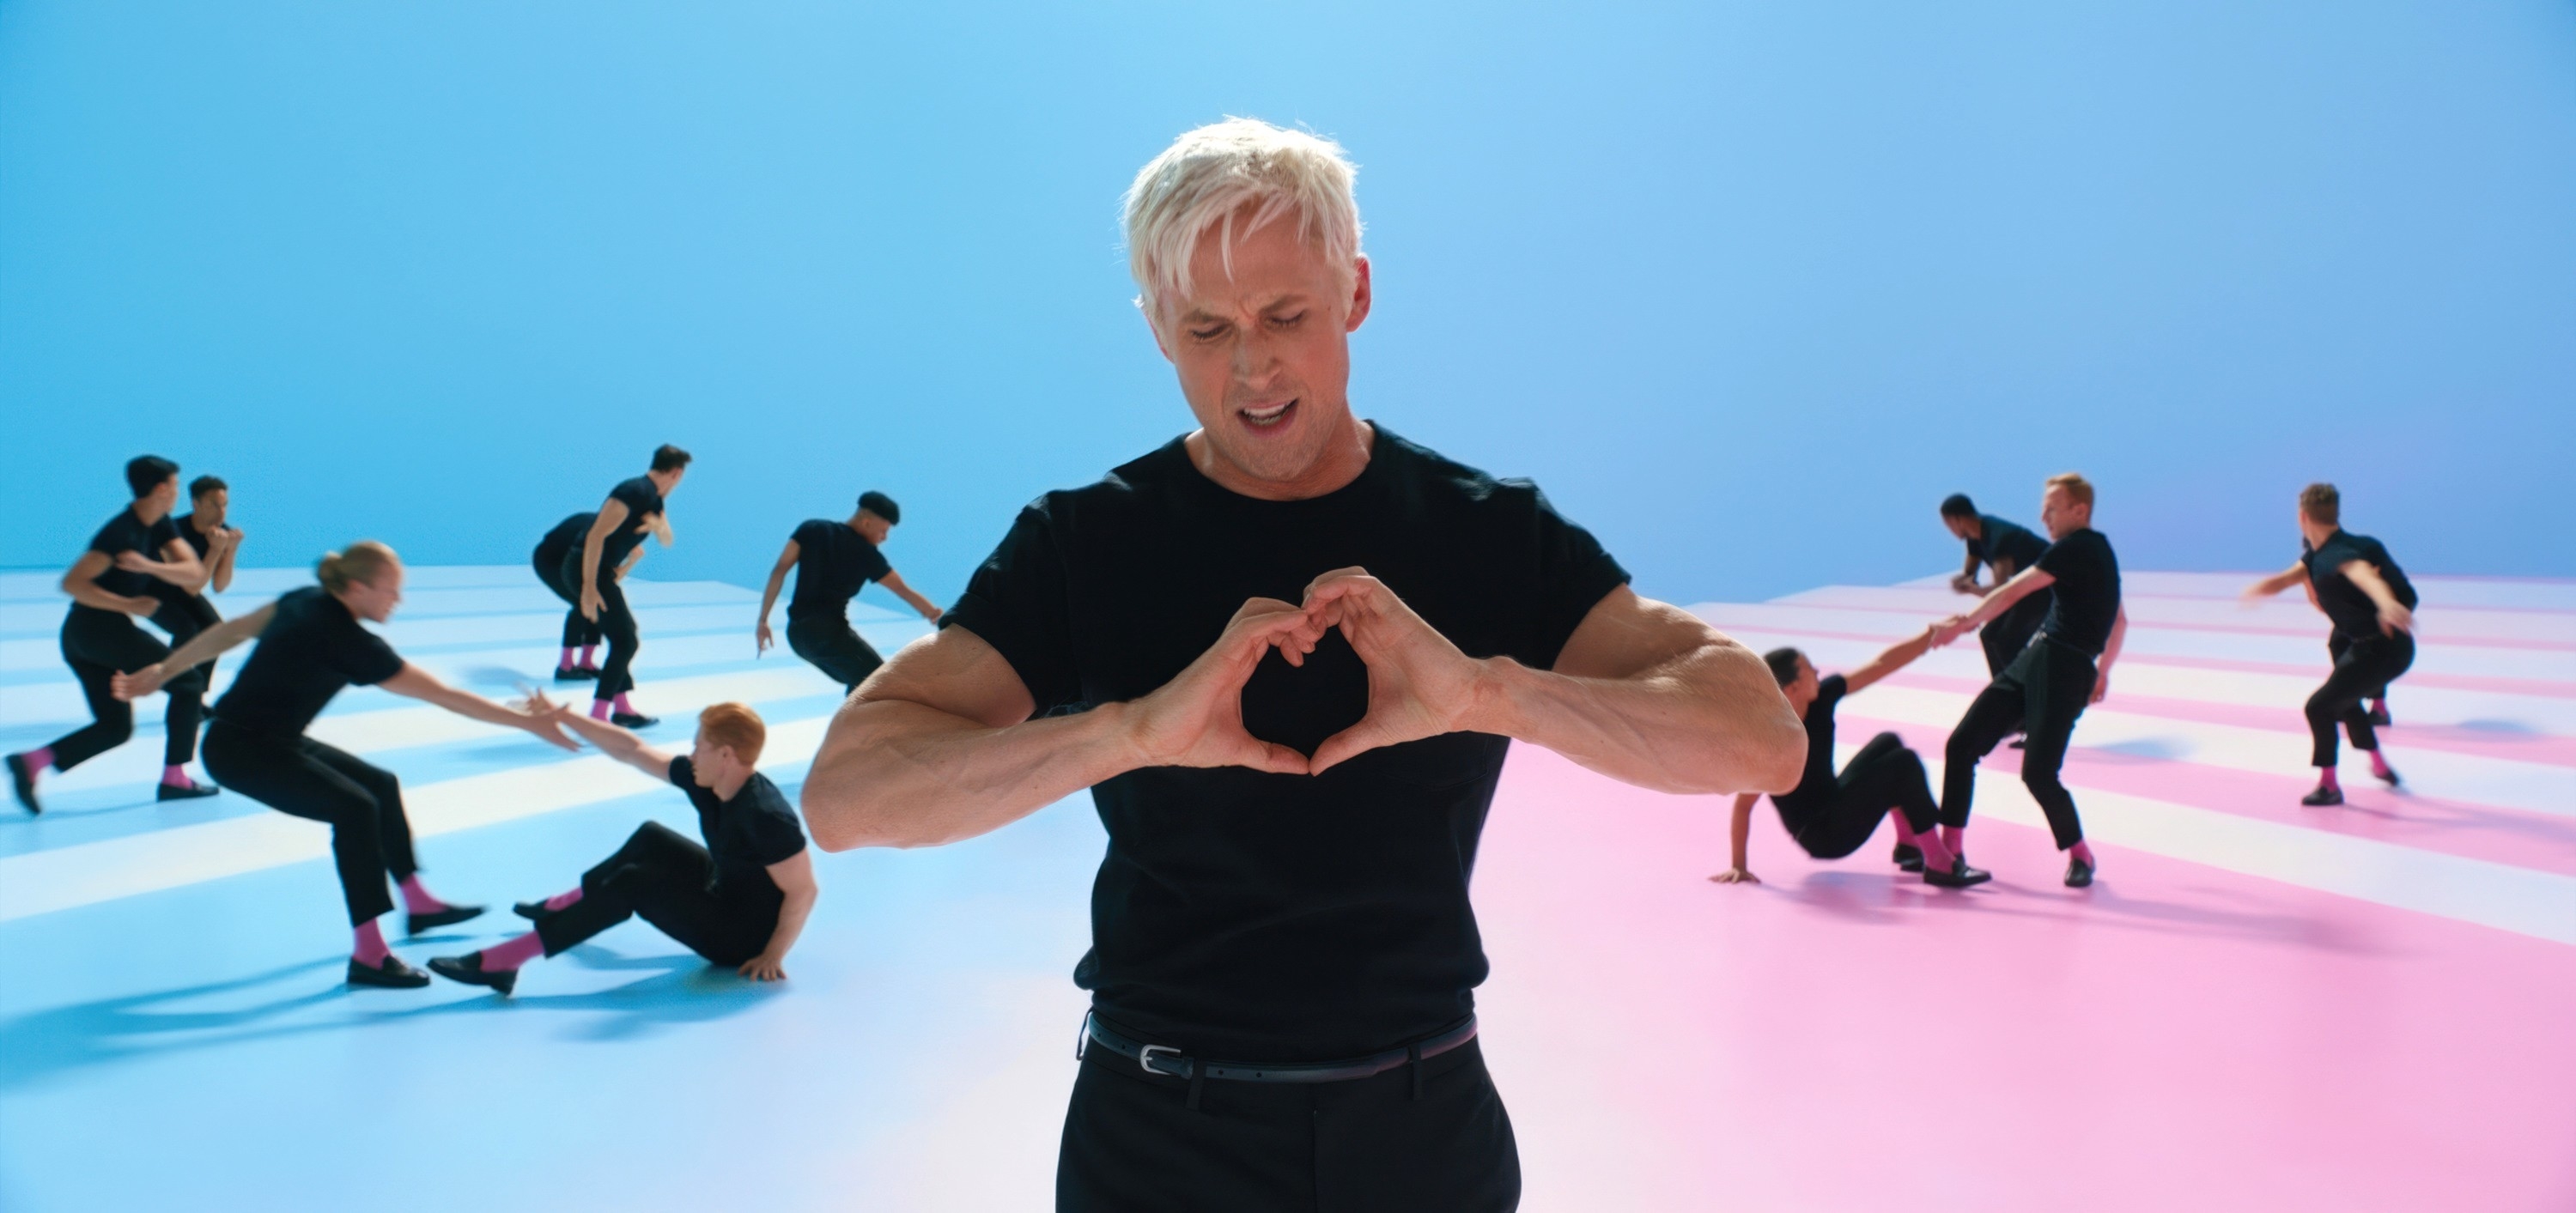 Person in black making a heart shape with hands, with dancers in the background